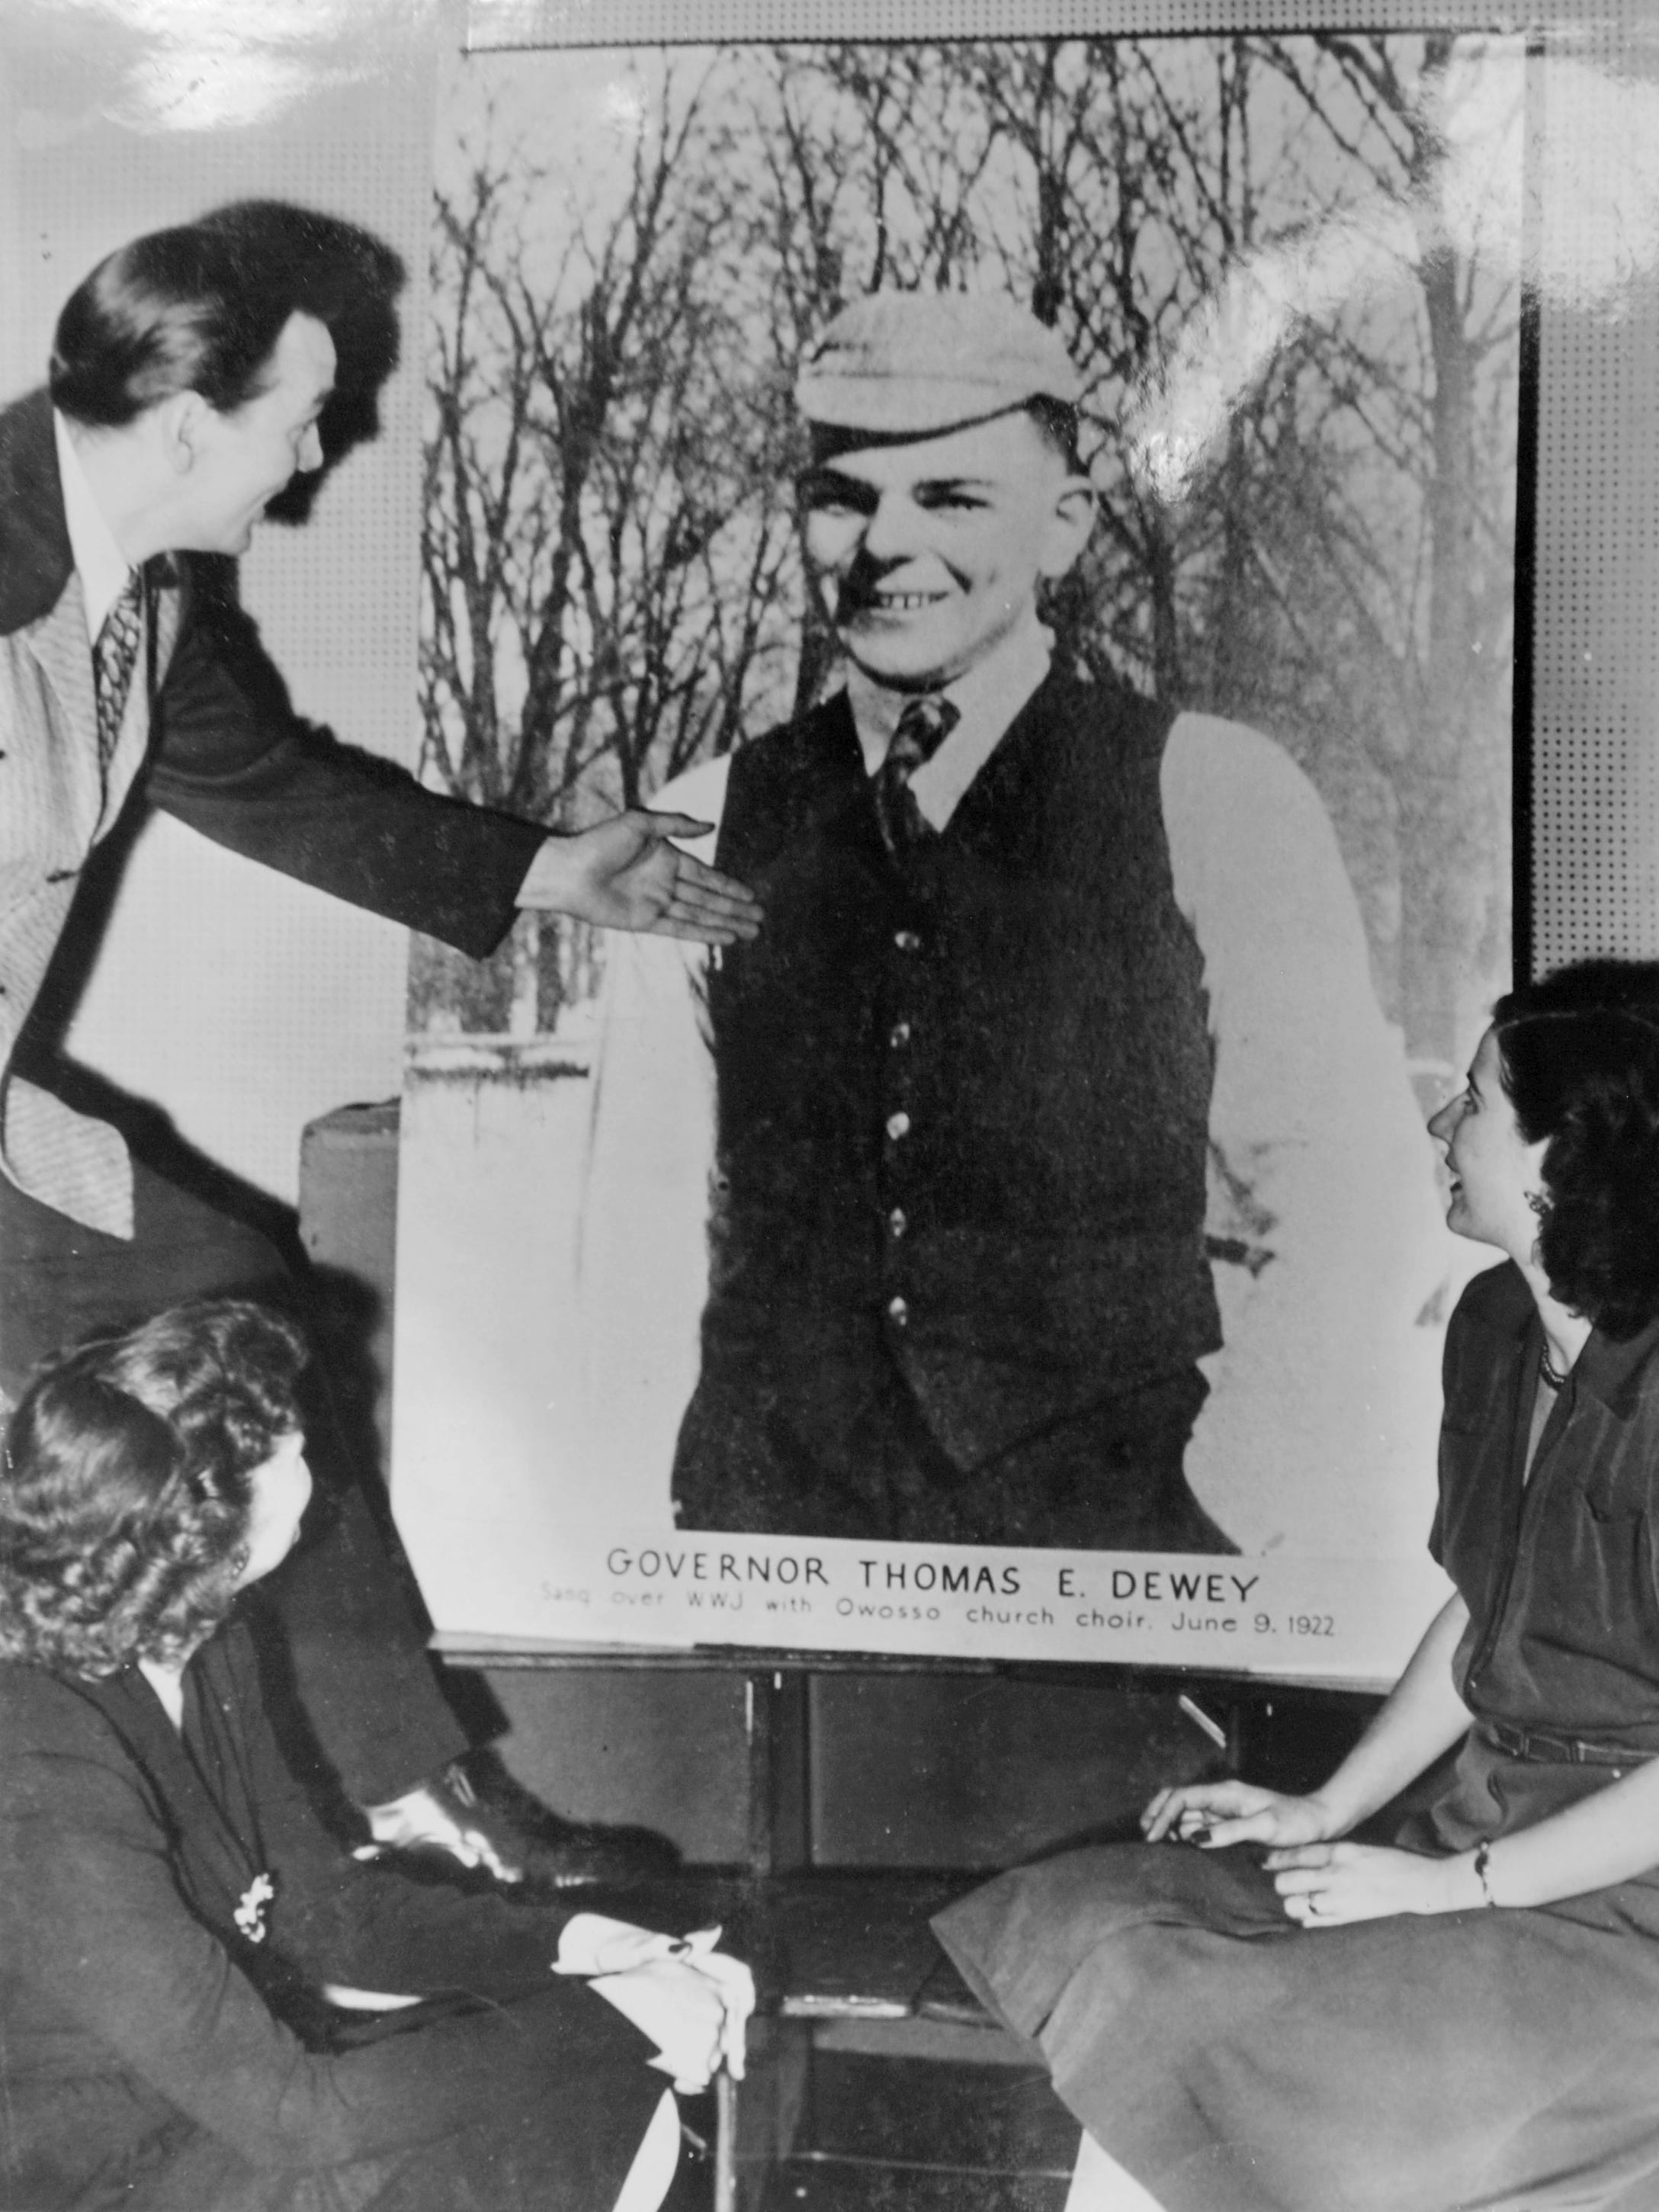 In this undated photo, people look at a vintage poster of Thomas E. Dewey, the governor of New York and Republican presidential candidate in 1944 and 1948. Dewey was a native of Owosso, Michigan, and, as the poster notes, sang over WWJ with an Owosso church choir in 1922.